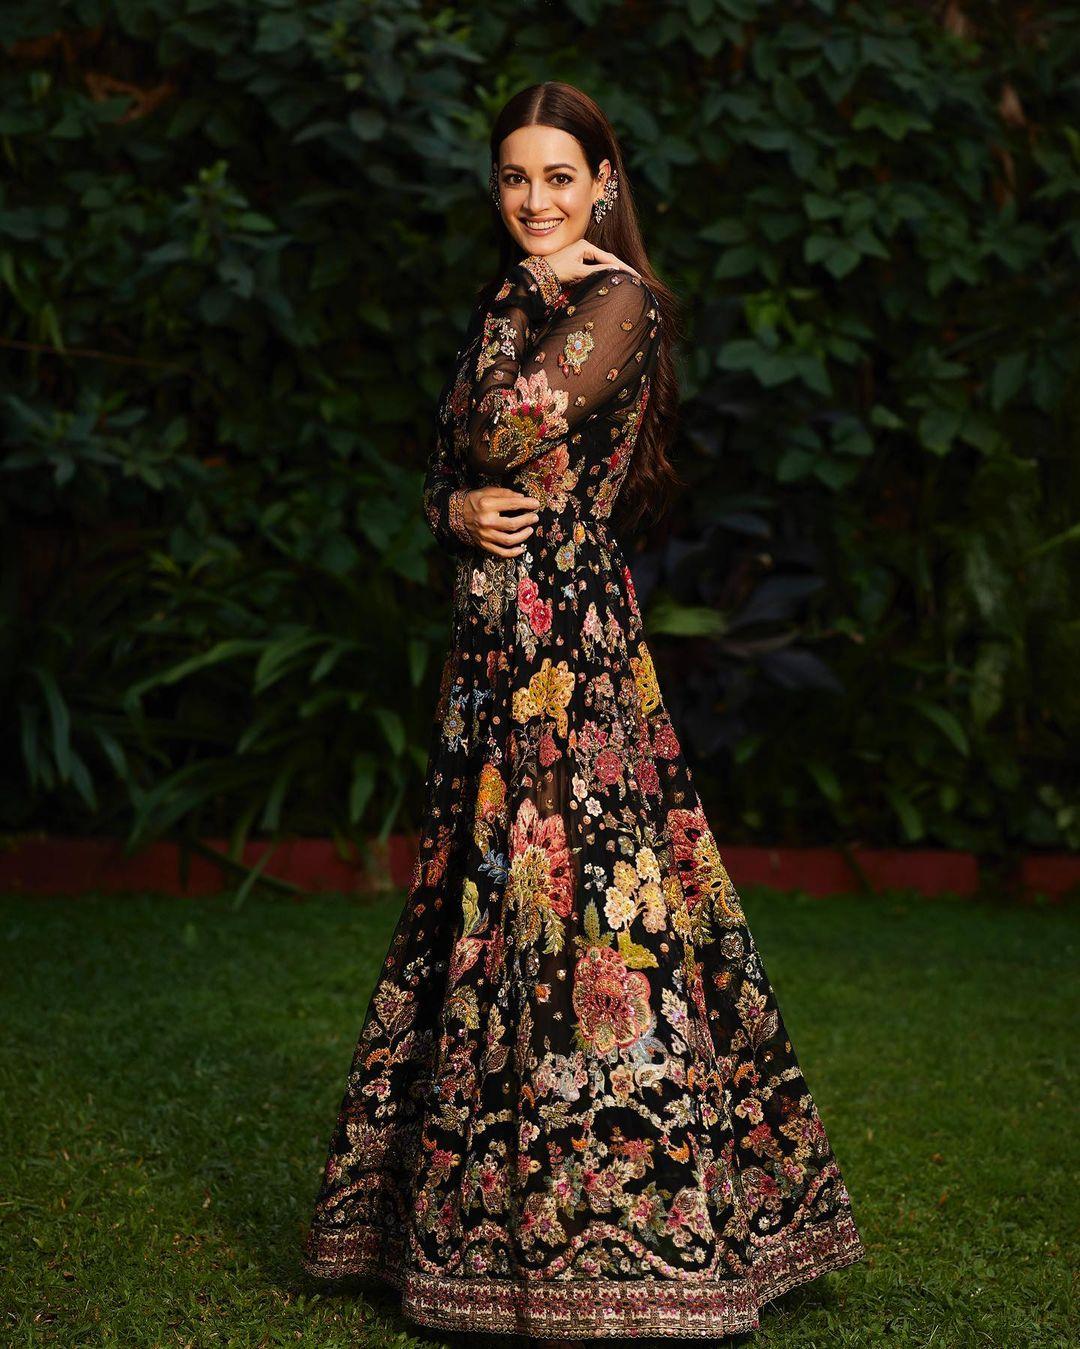 Floral fun: Dia Mirza celebrated the spectacular opening of the NMACC earlier this year in this handcrafted Ritu Kumar outfit. Ritu Kumar is one of the first Indian wear brands and this wildflower dress is an ode to the world of finest Indian craftsmanship.